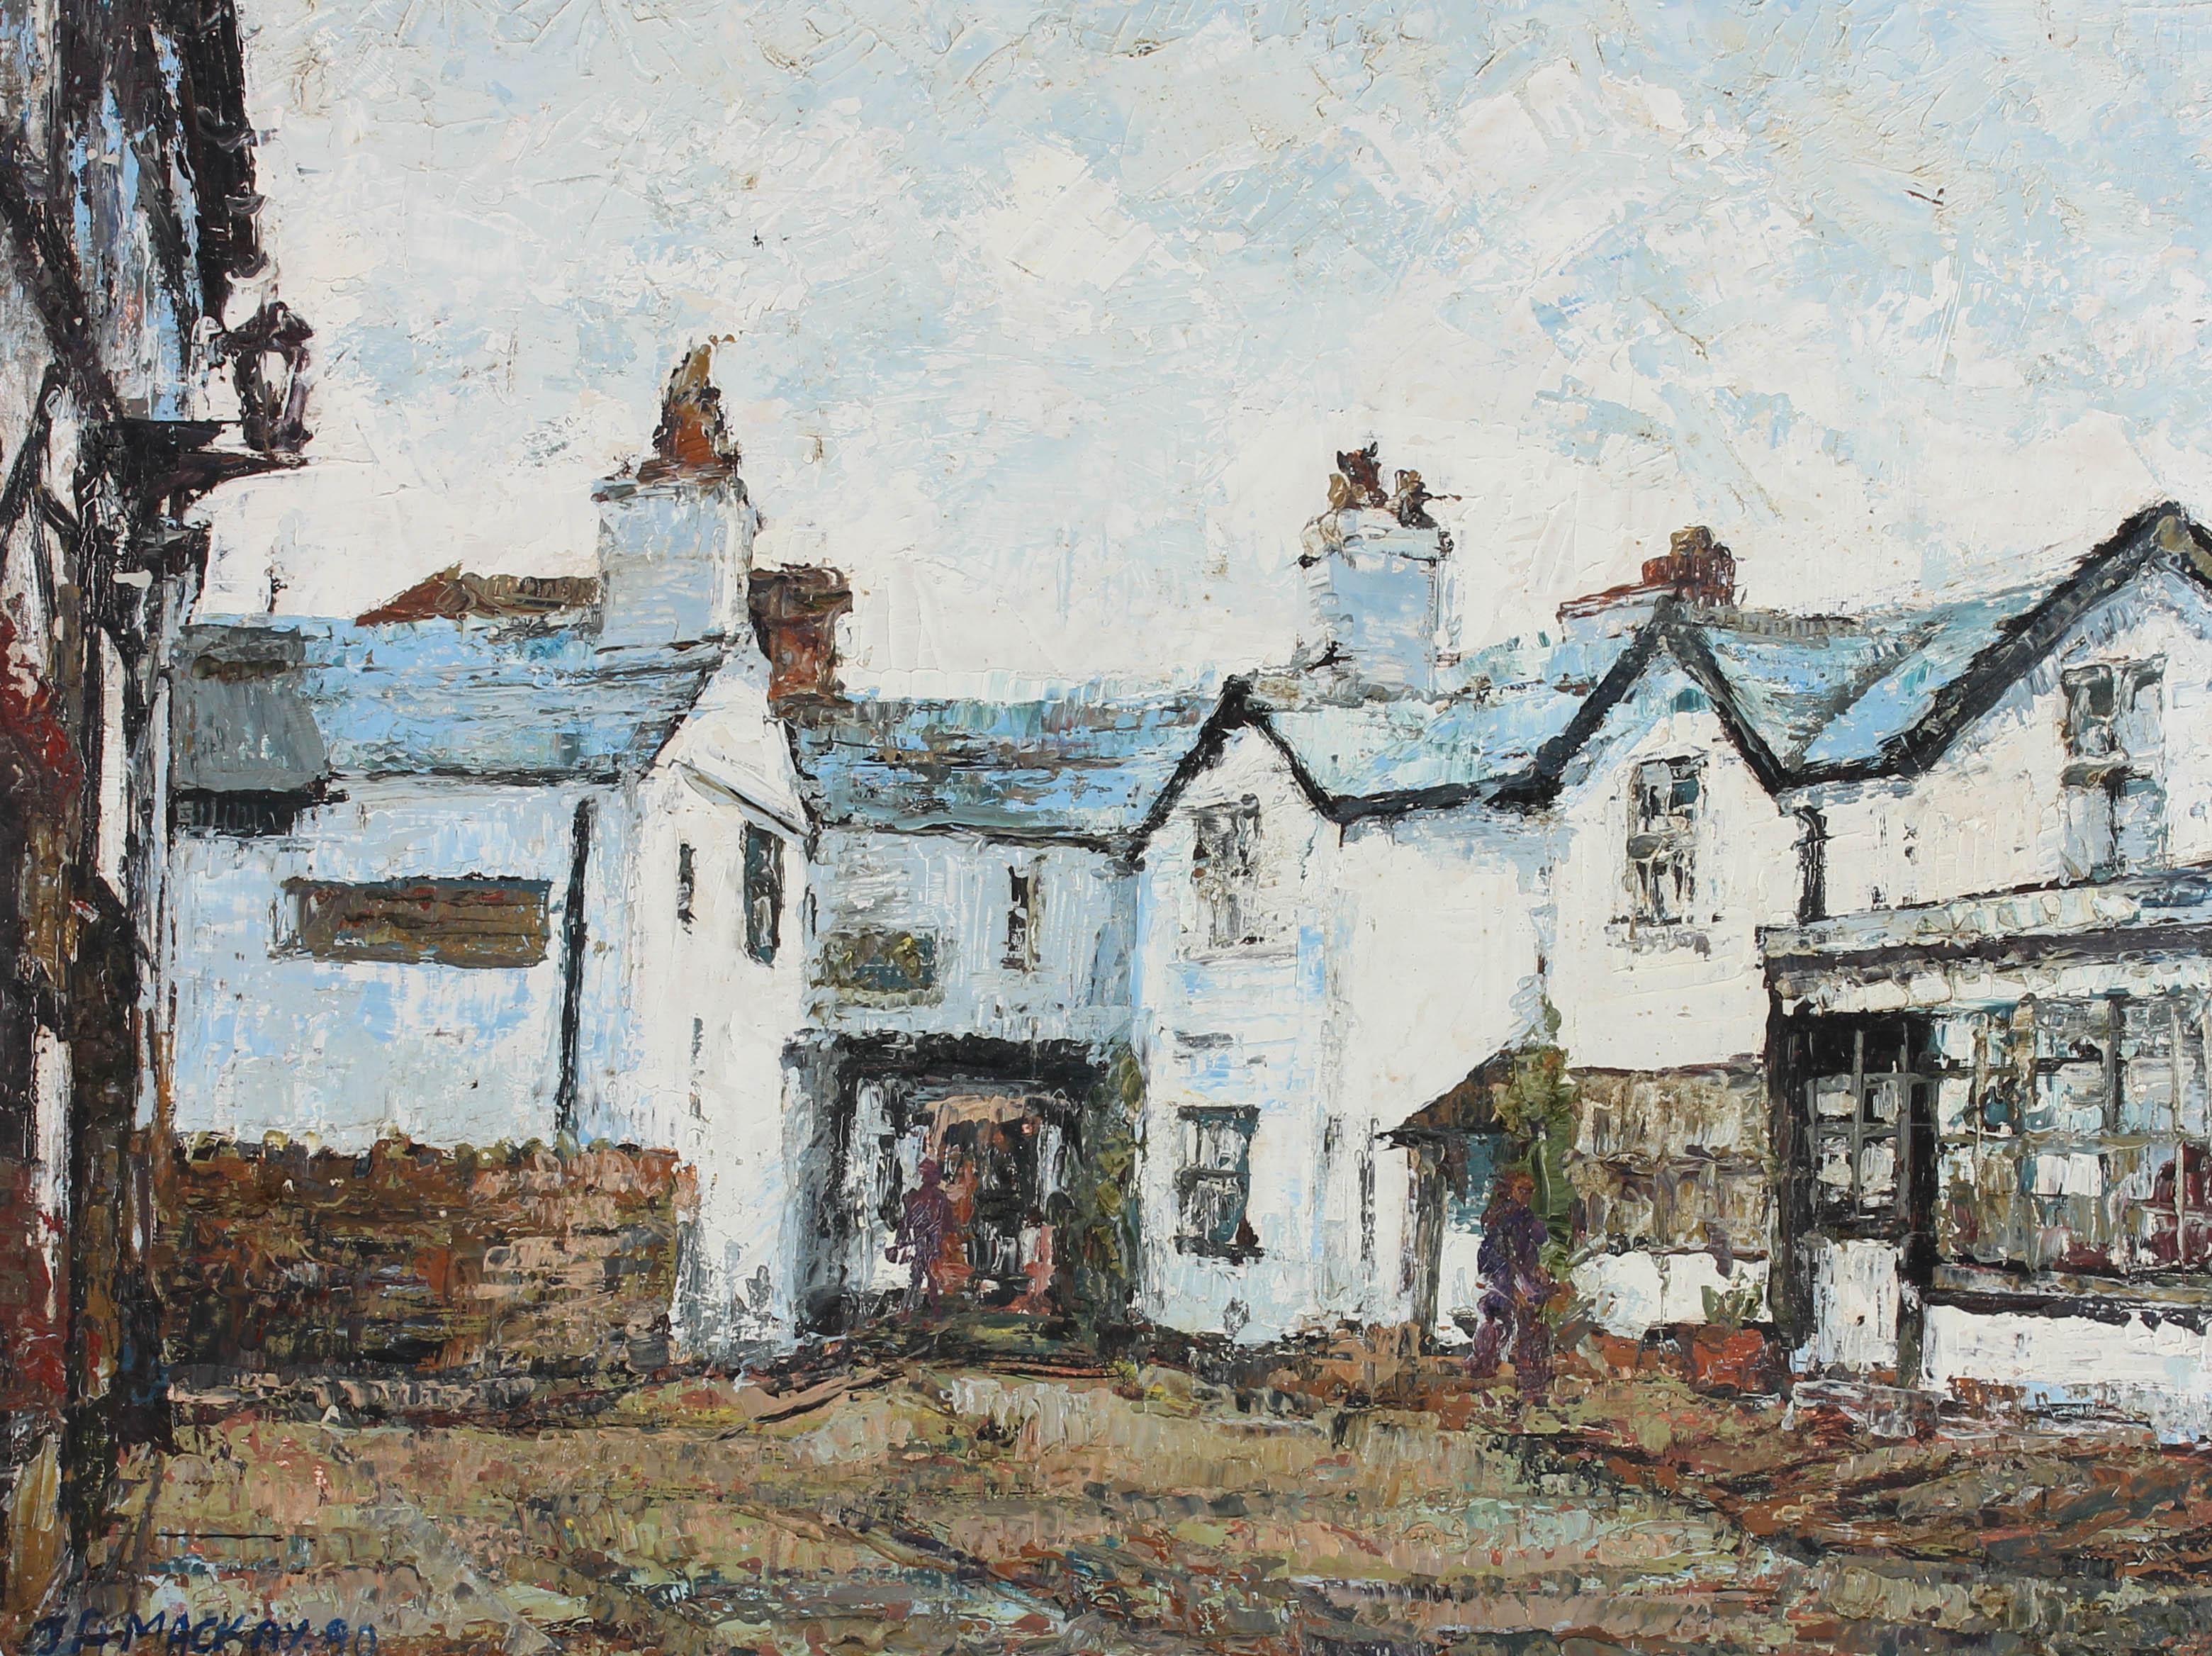 J A Mackay Landscape Painting - J A MacKay - 1980 Oil, The Old Town Courtyard